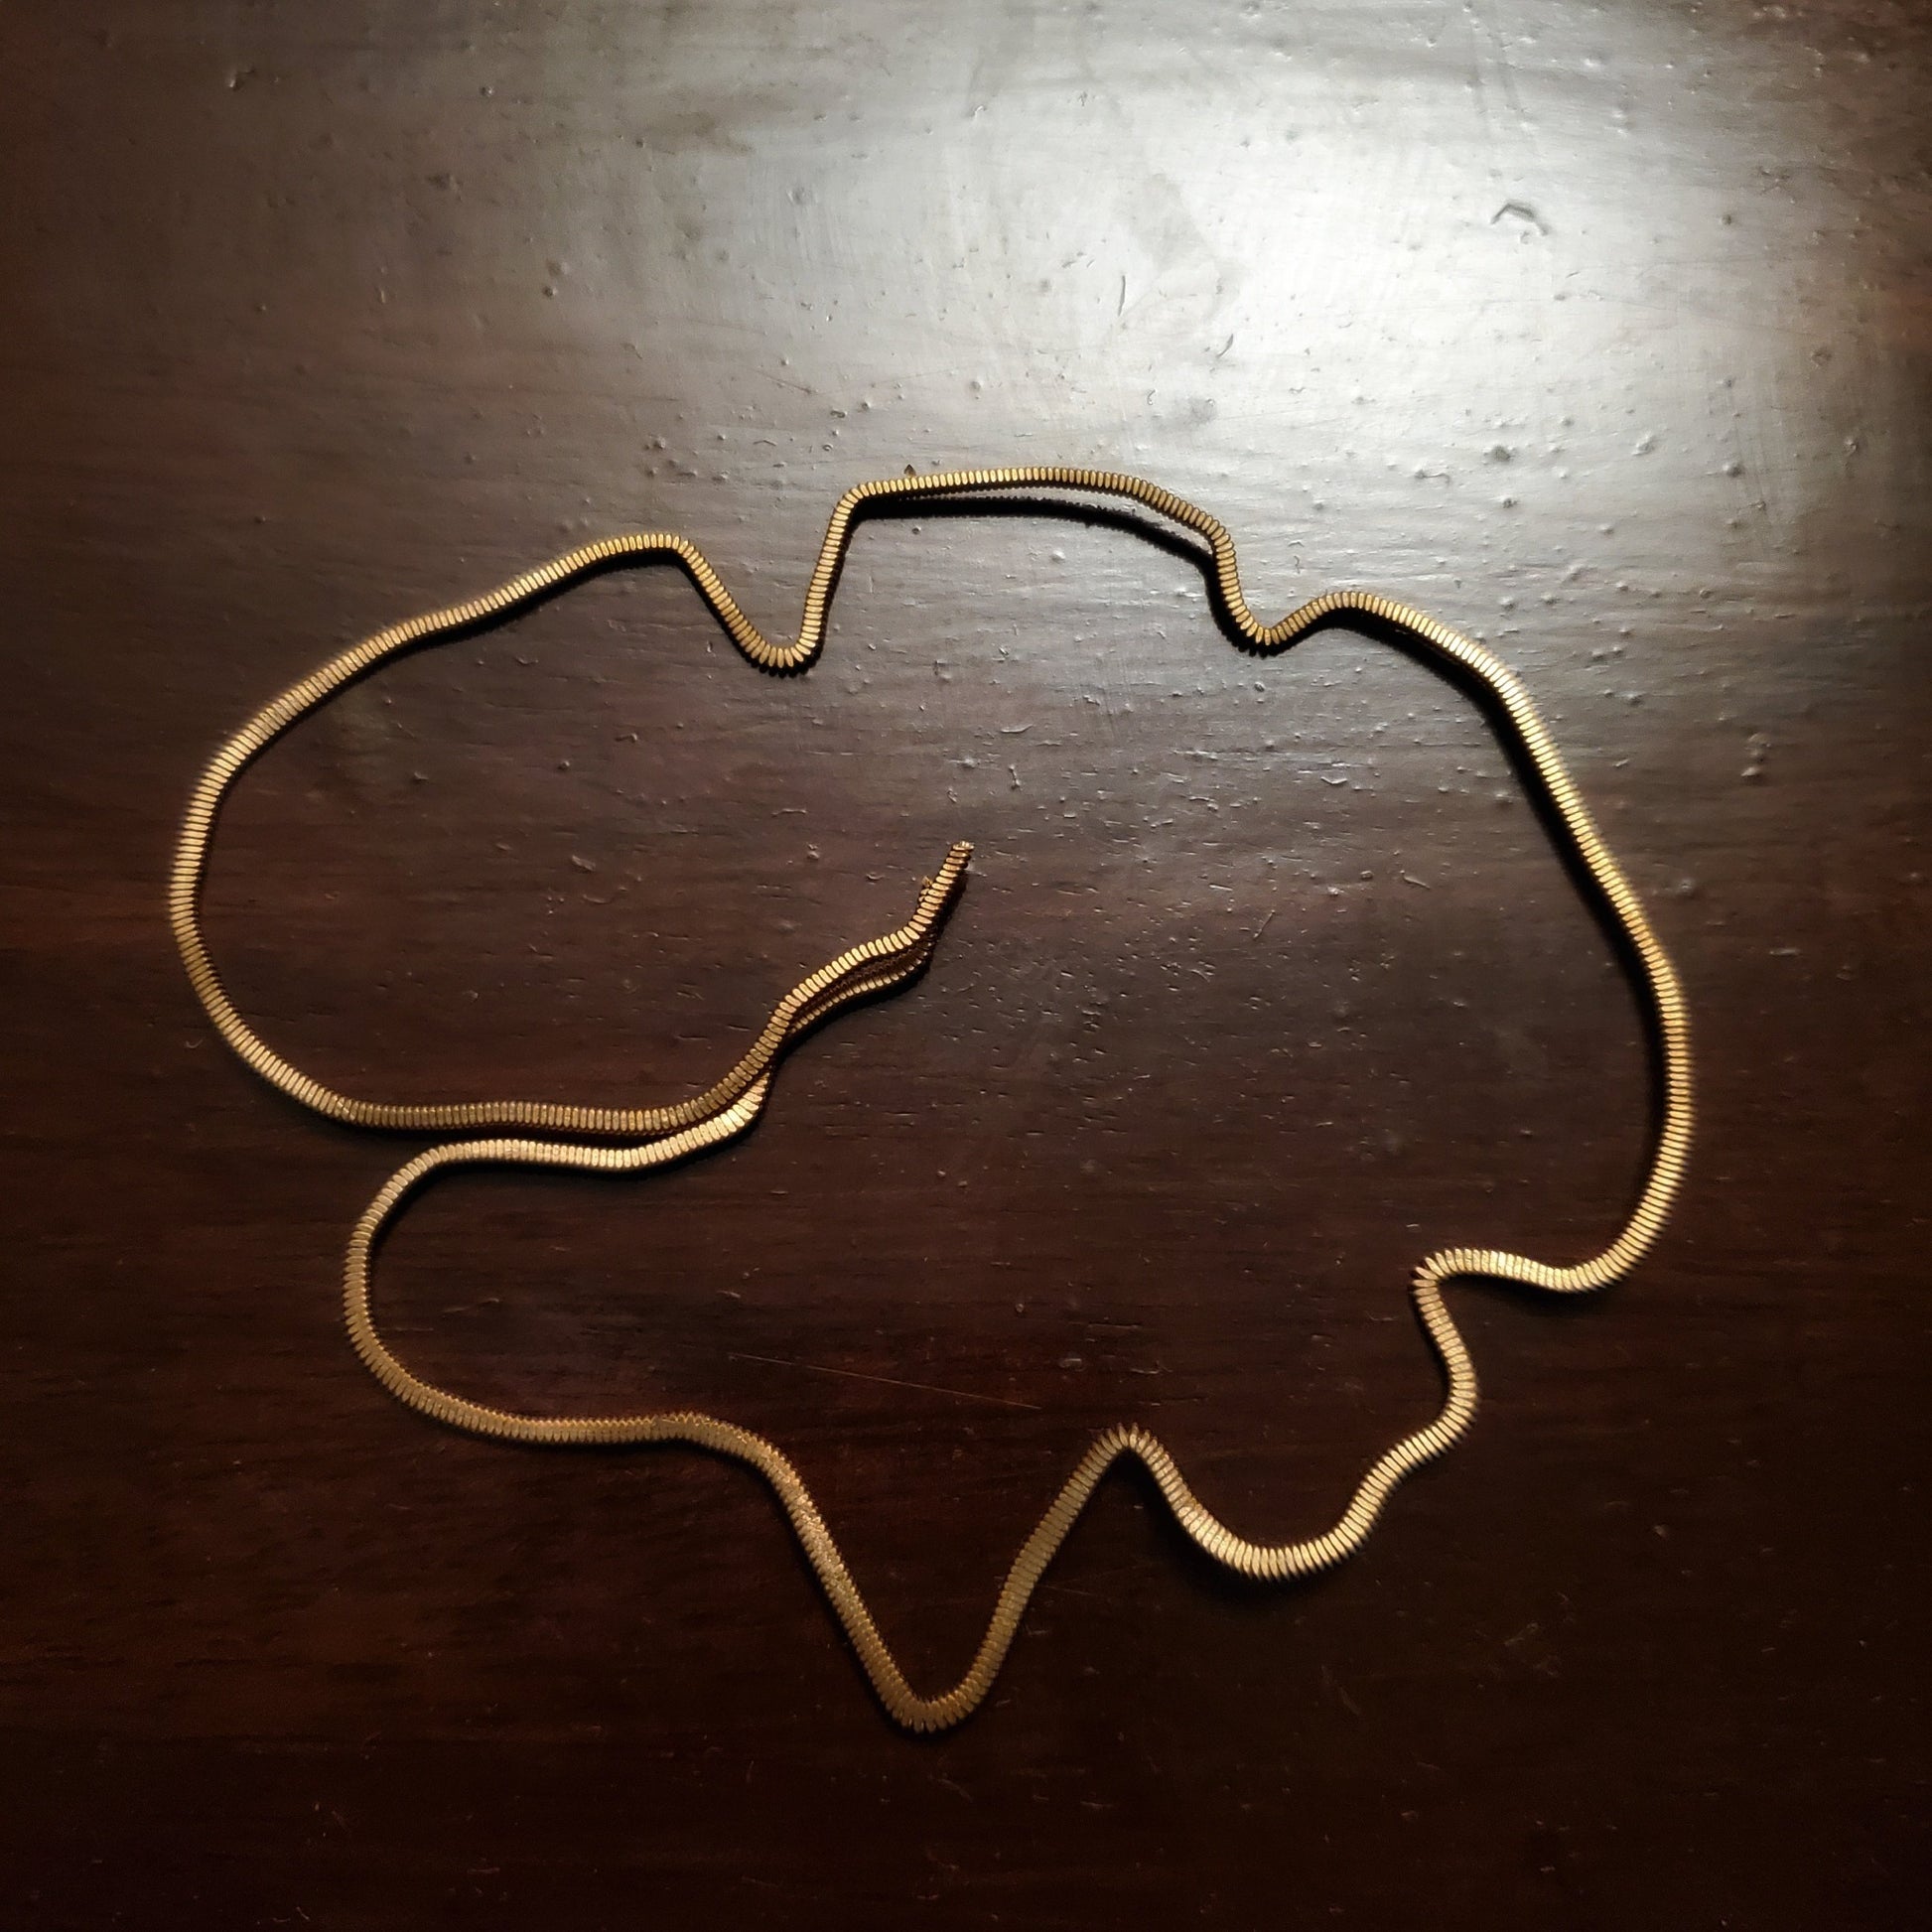 guitar string bookmark in the shape of a brain - dark brown background